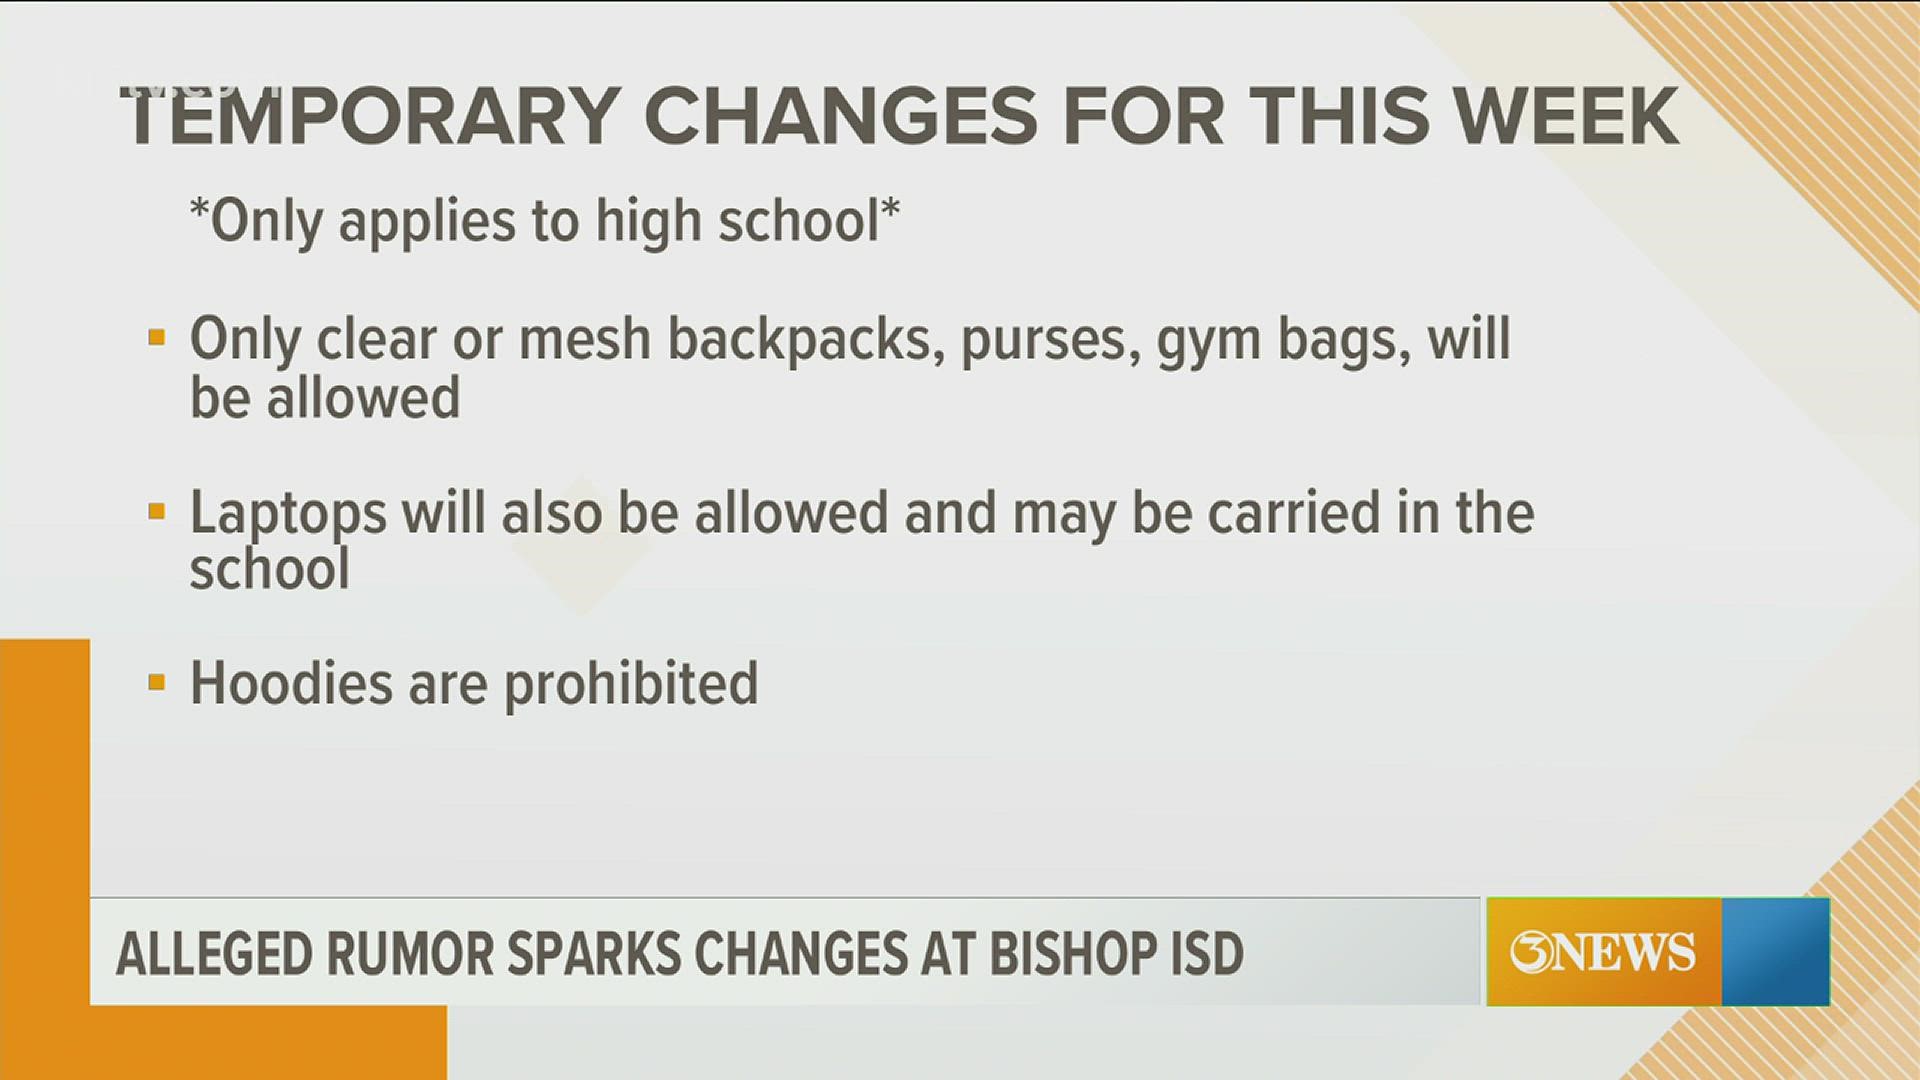 Students will only be allowed to carry clear or mesh backpacks, purses and gym bags. No hoodies will be allowed this week, officials said.